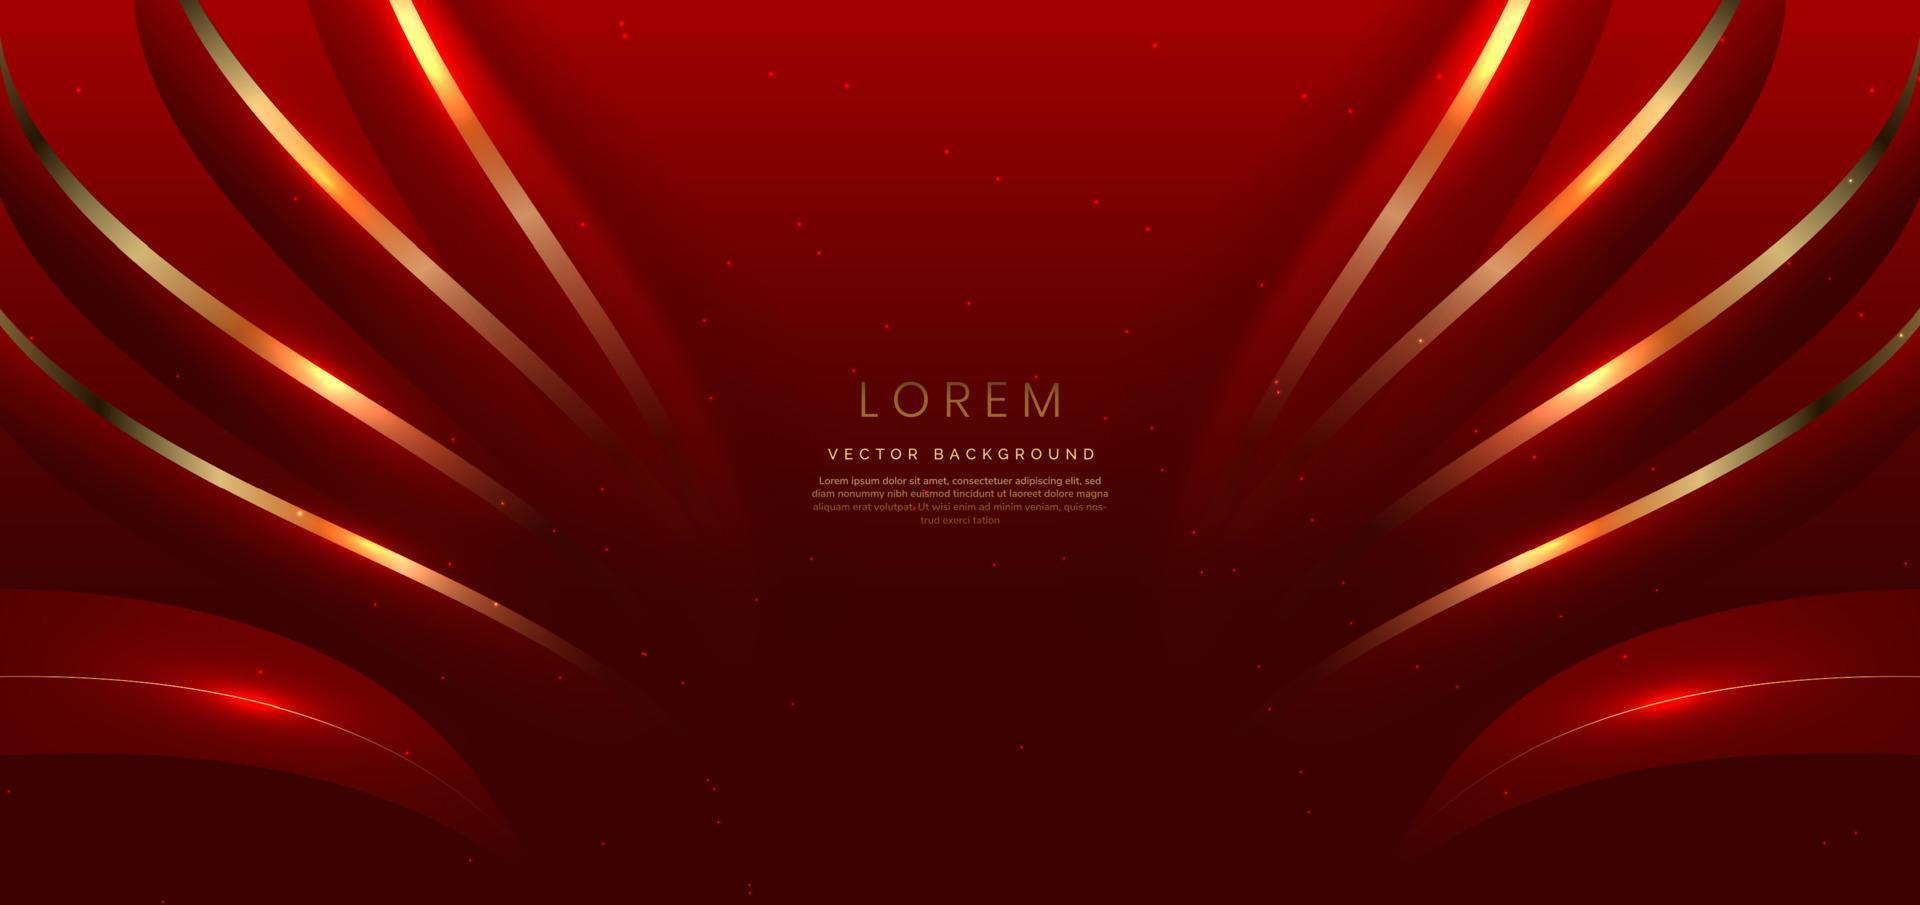 Abstract 3d gold curved red ribbon on red background with lighting effect and sparkle with copy space for text. vector